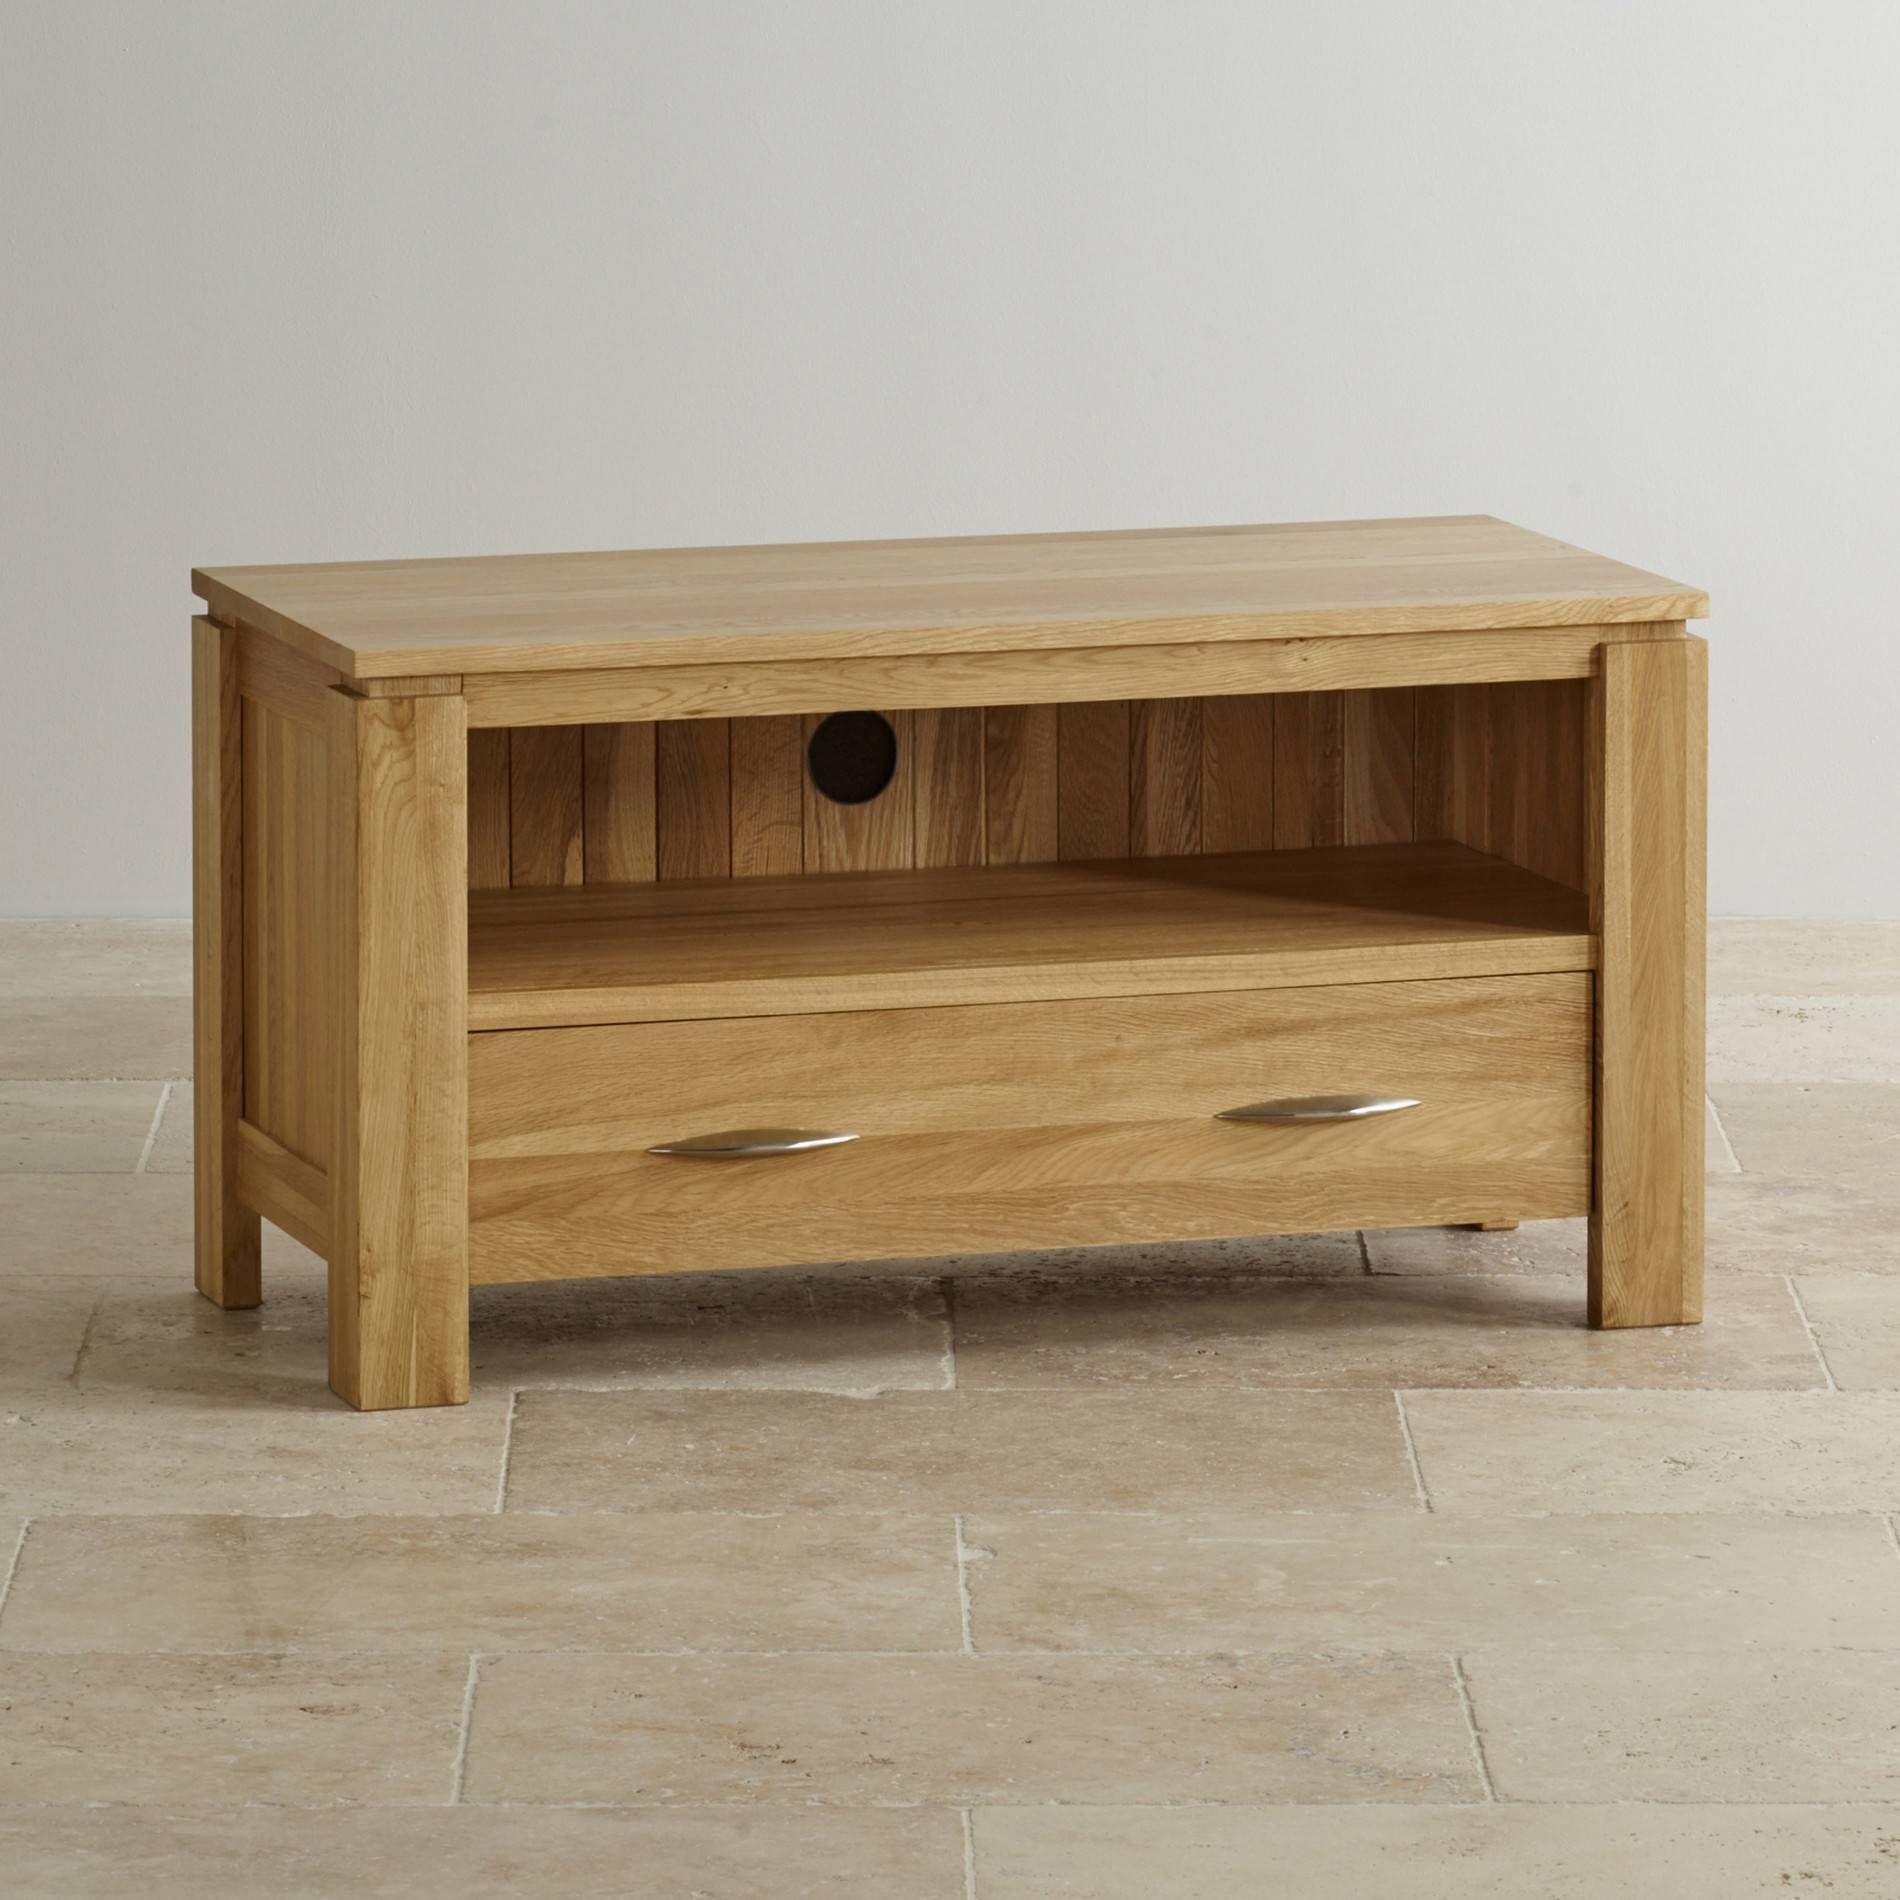 Galway Natural Solid Oak Tv + Dvd Stand | Living Room Furniture Throughout Oak Tv Cabinets (View 1 of 15)